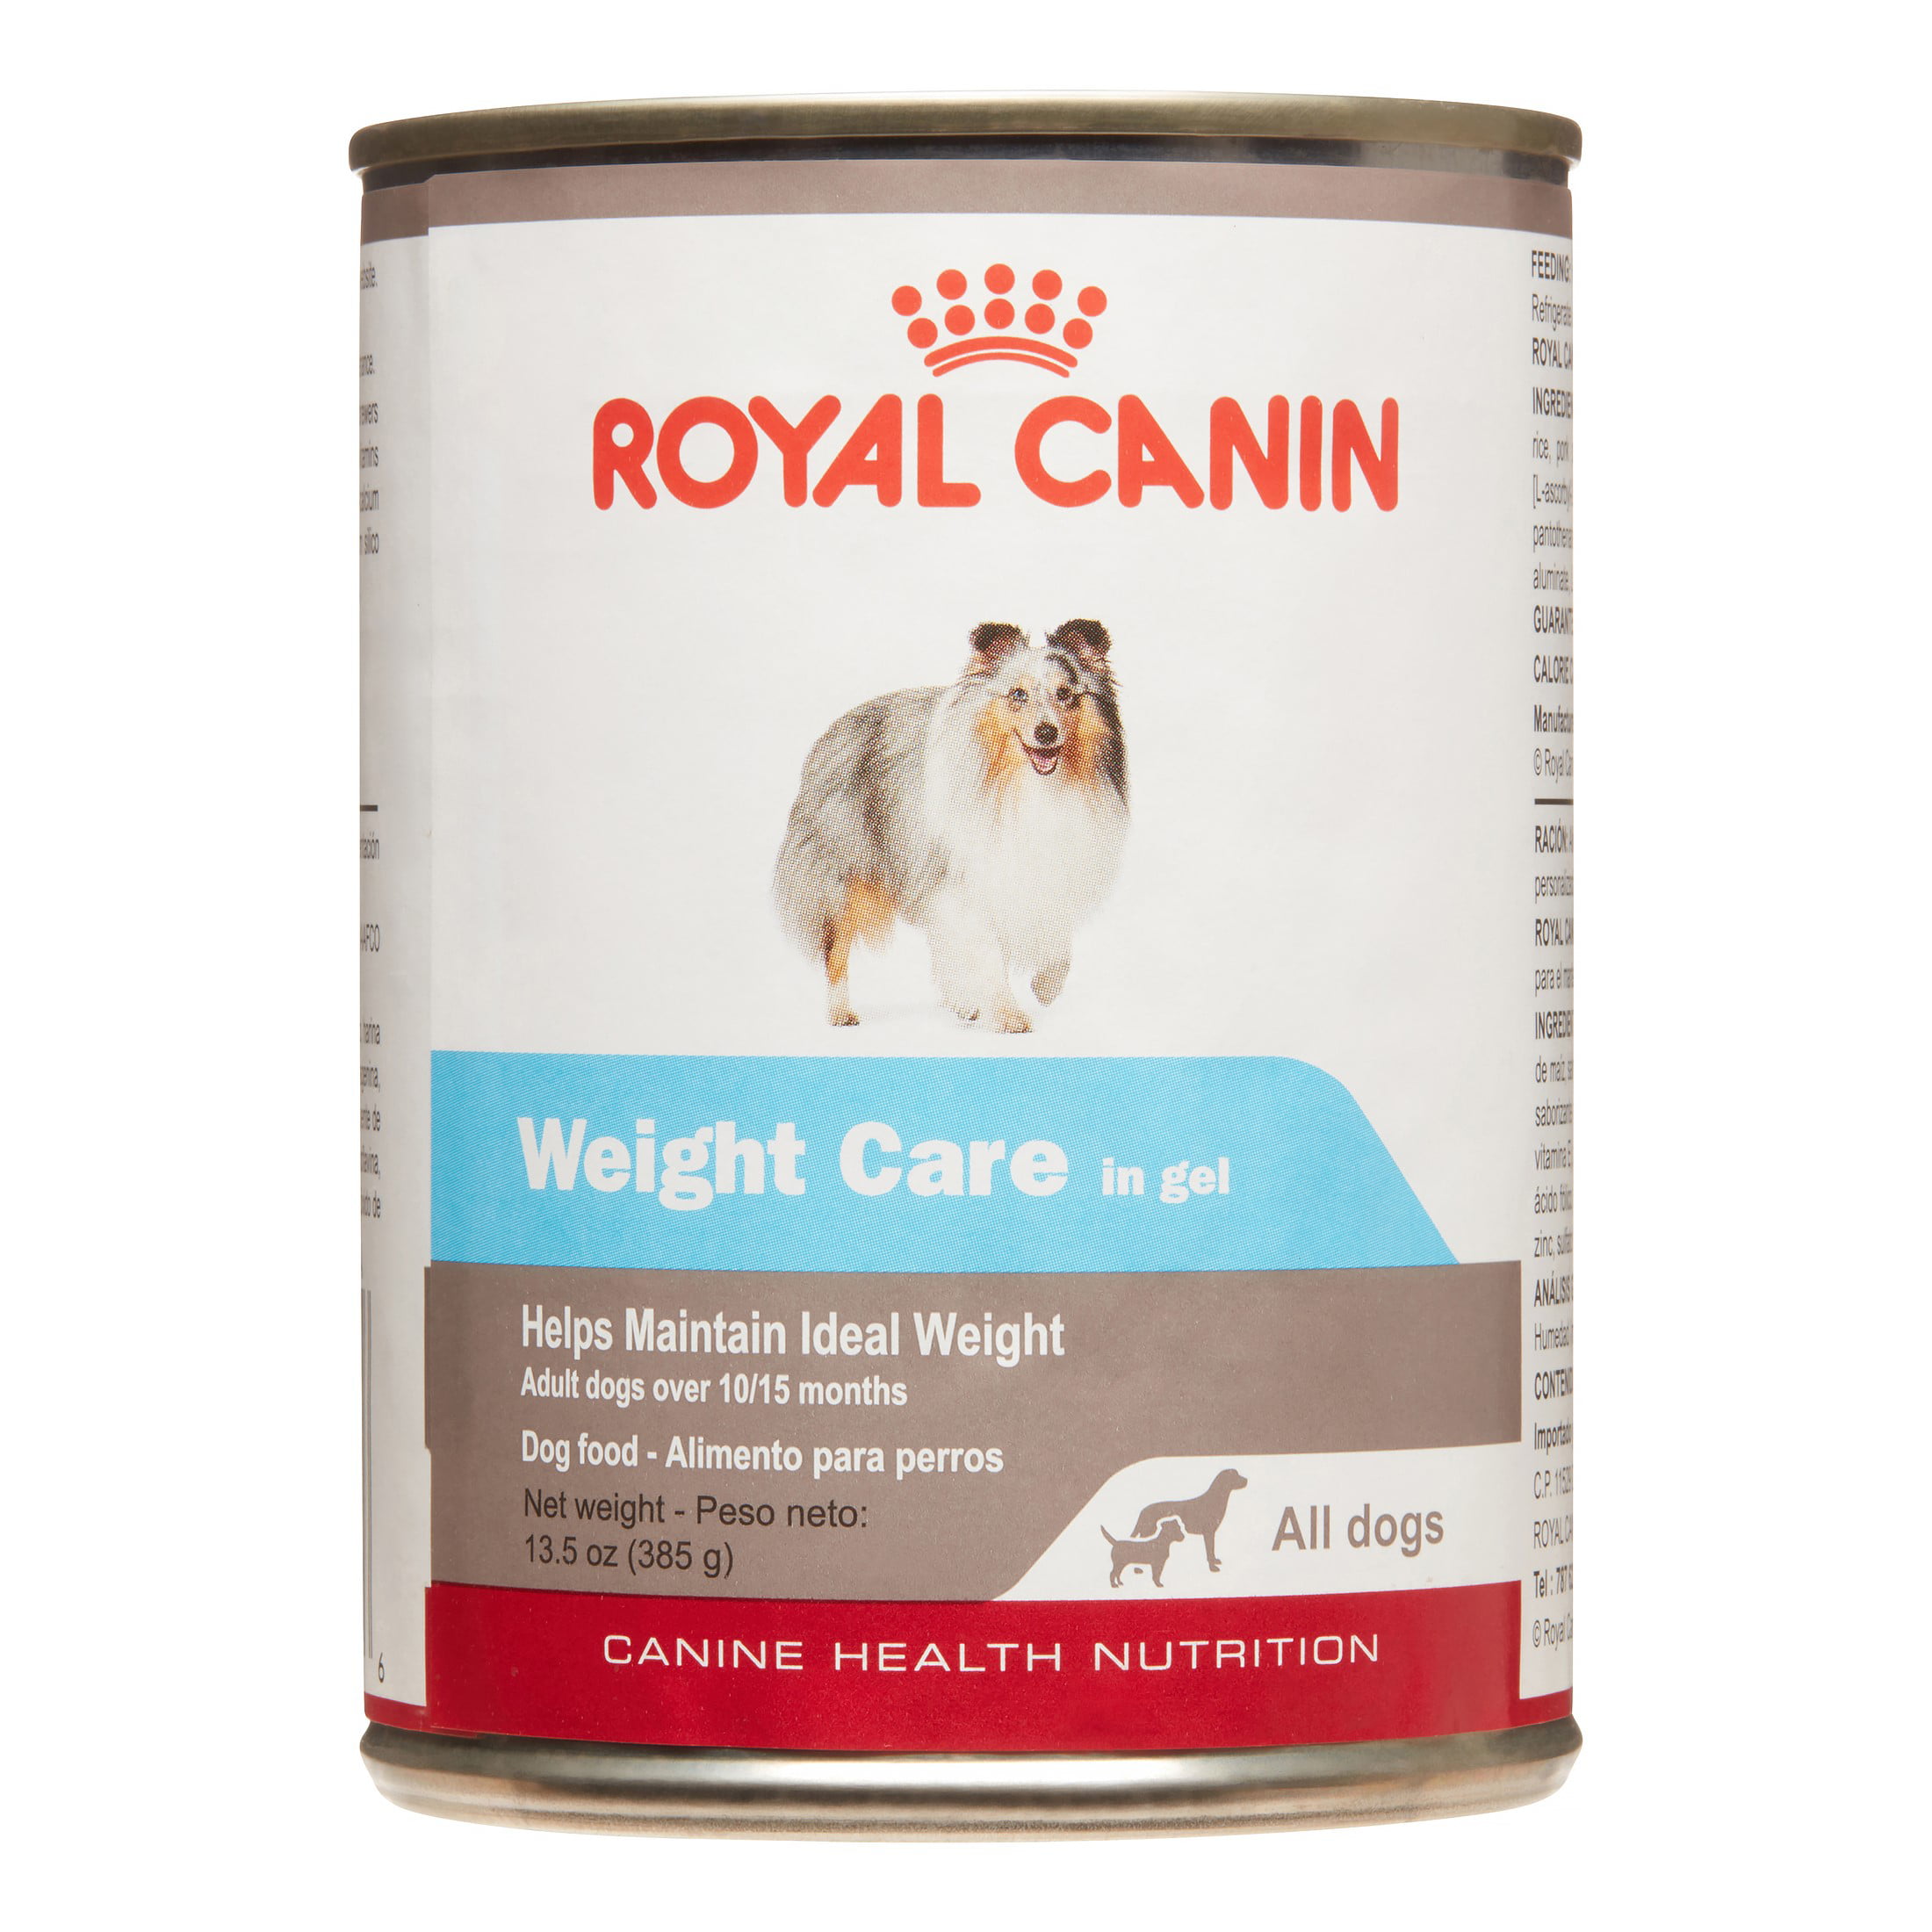 Royal Canin Weight Care in Gel Wet Dog Food, 13.5 oz (Case of 12